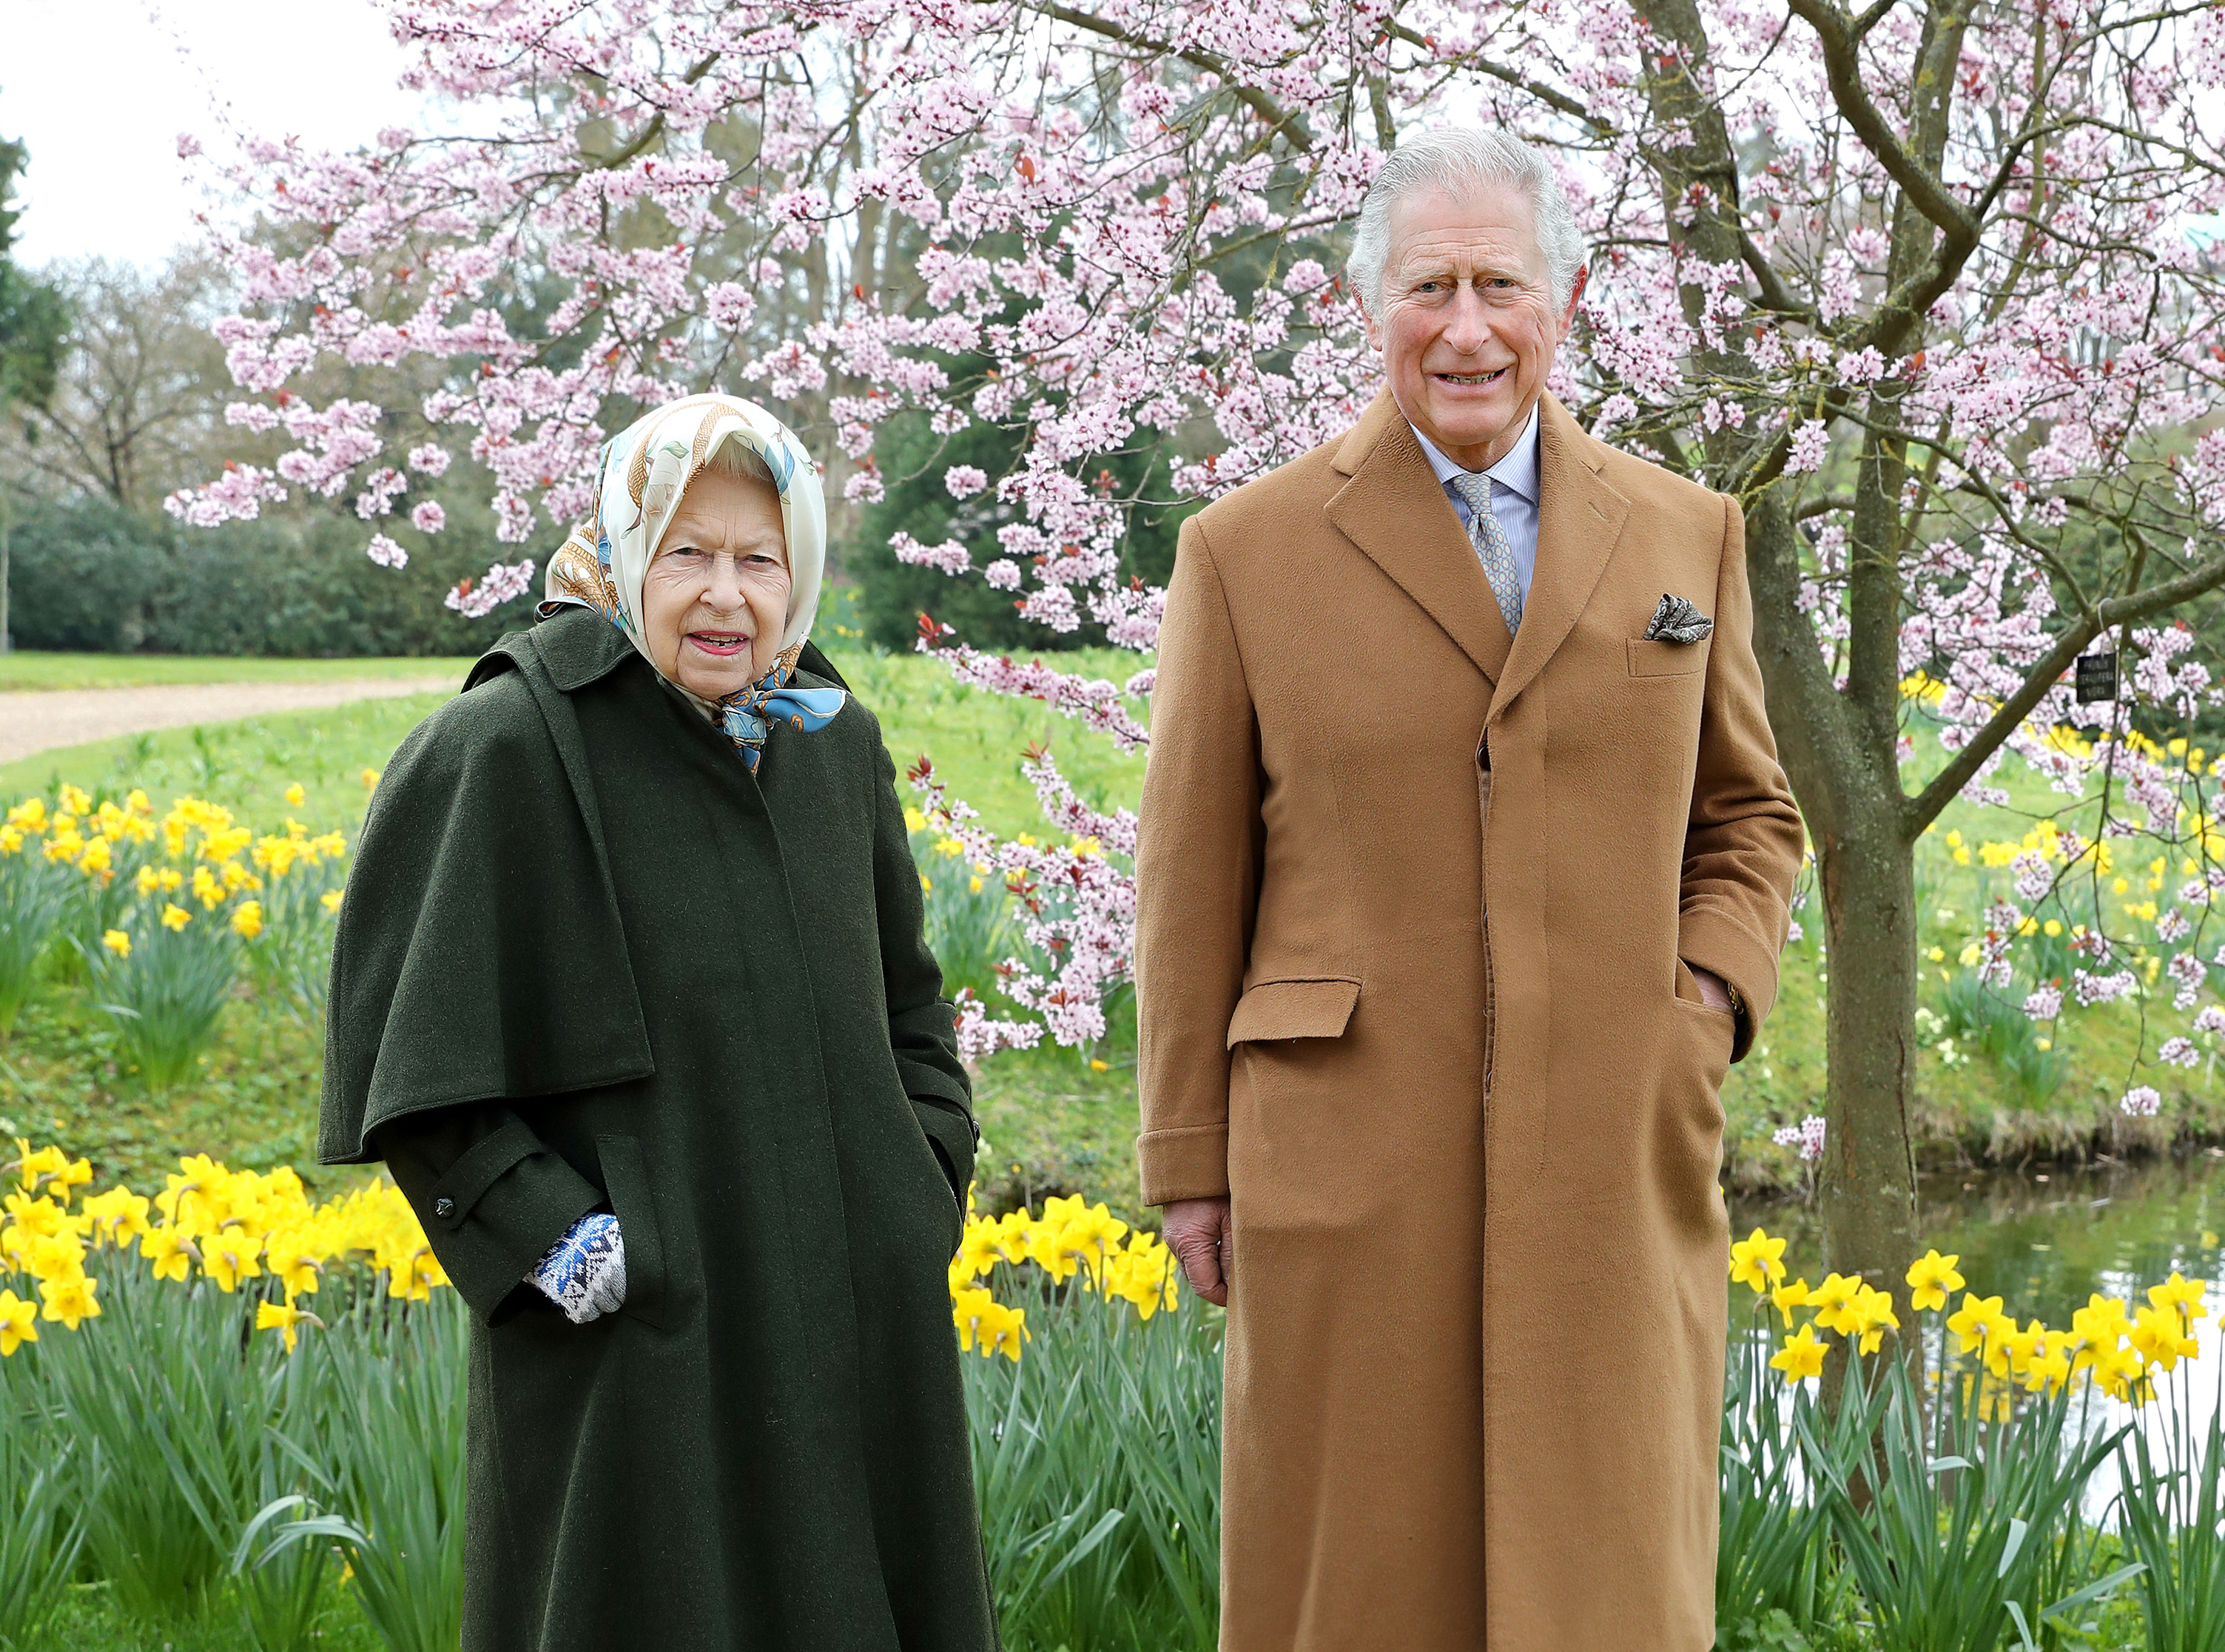 Queen Elizabeth II and Prince Charles, Prince of Wales, pose for a portrait in the garden of Frogmore House in Windsor, England on March 23, 2021. | Source: Getty Images